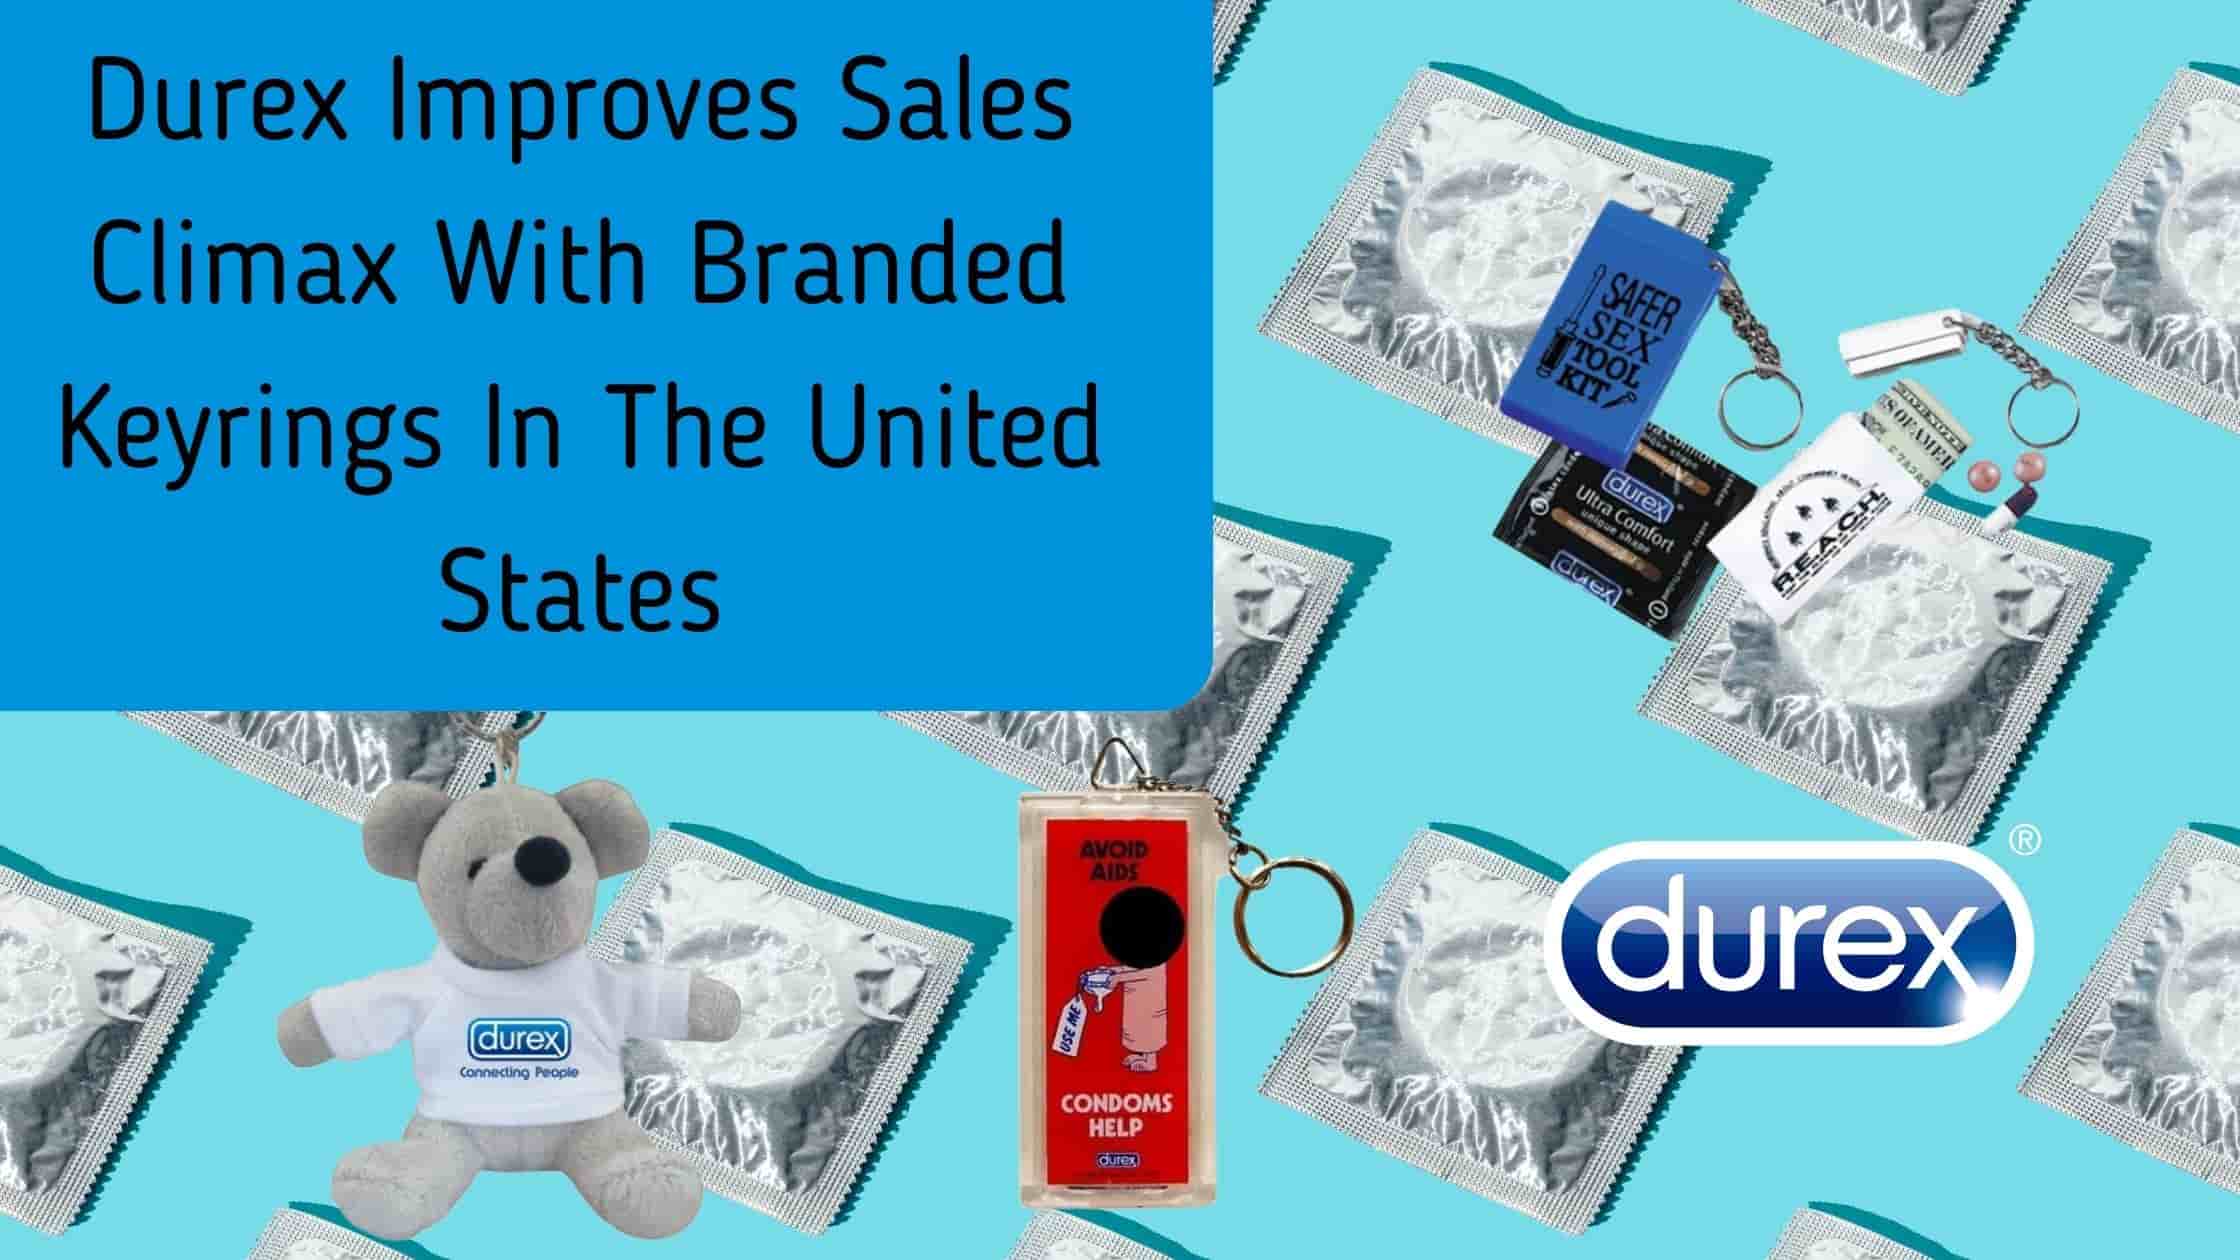 Durex Improves Sales Climax With Branded Keyrings In The United States